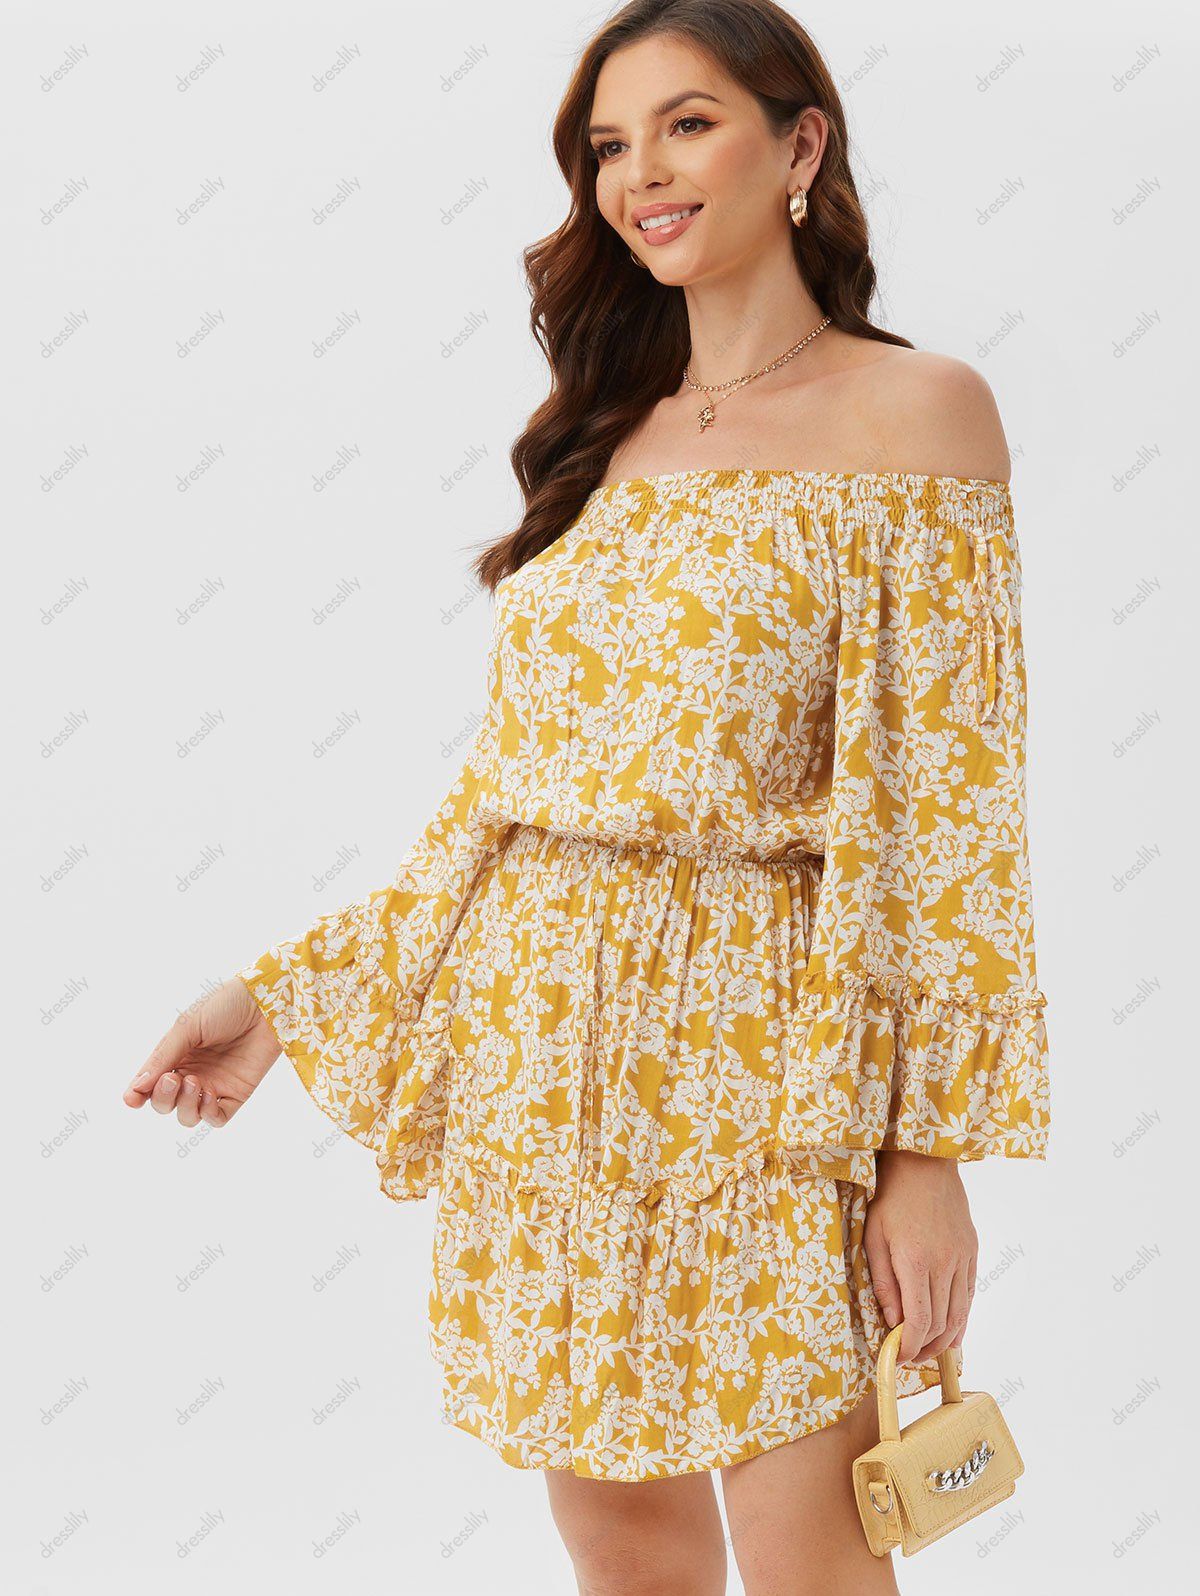 Floral Print Vacation Mini Dress Off The Shoulder Bell Sleeve Cottagecore Dress 